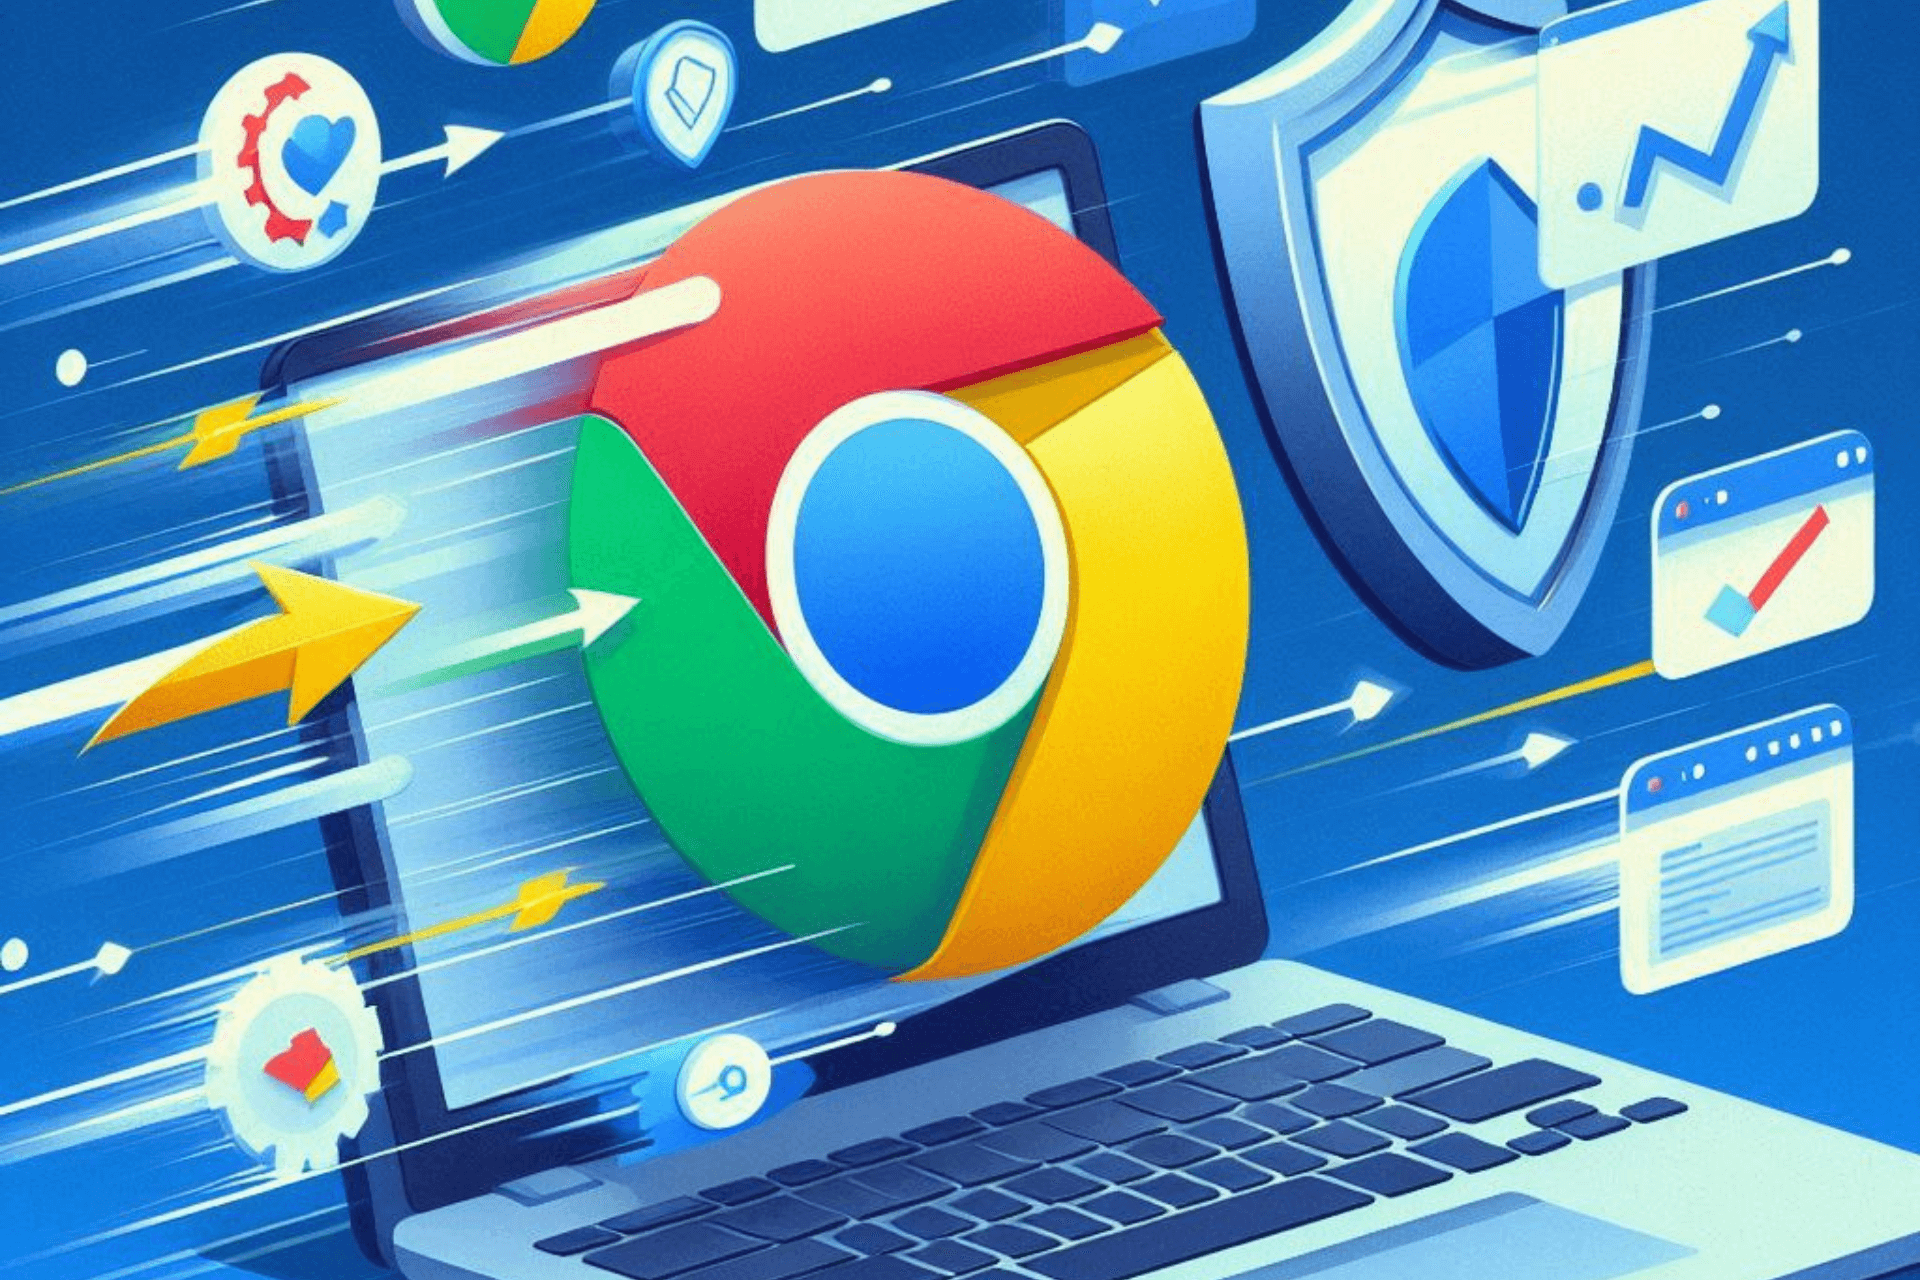 Chrome to Perform Website Safe Checks without Slowing Down the Browser